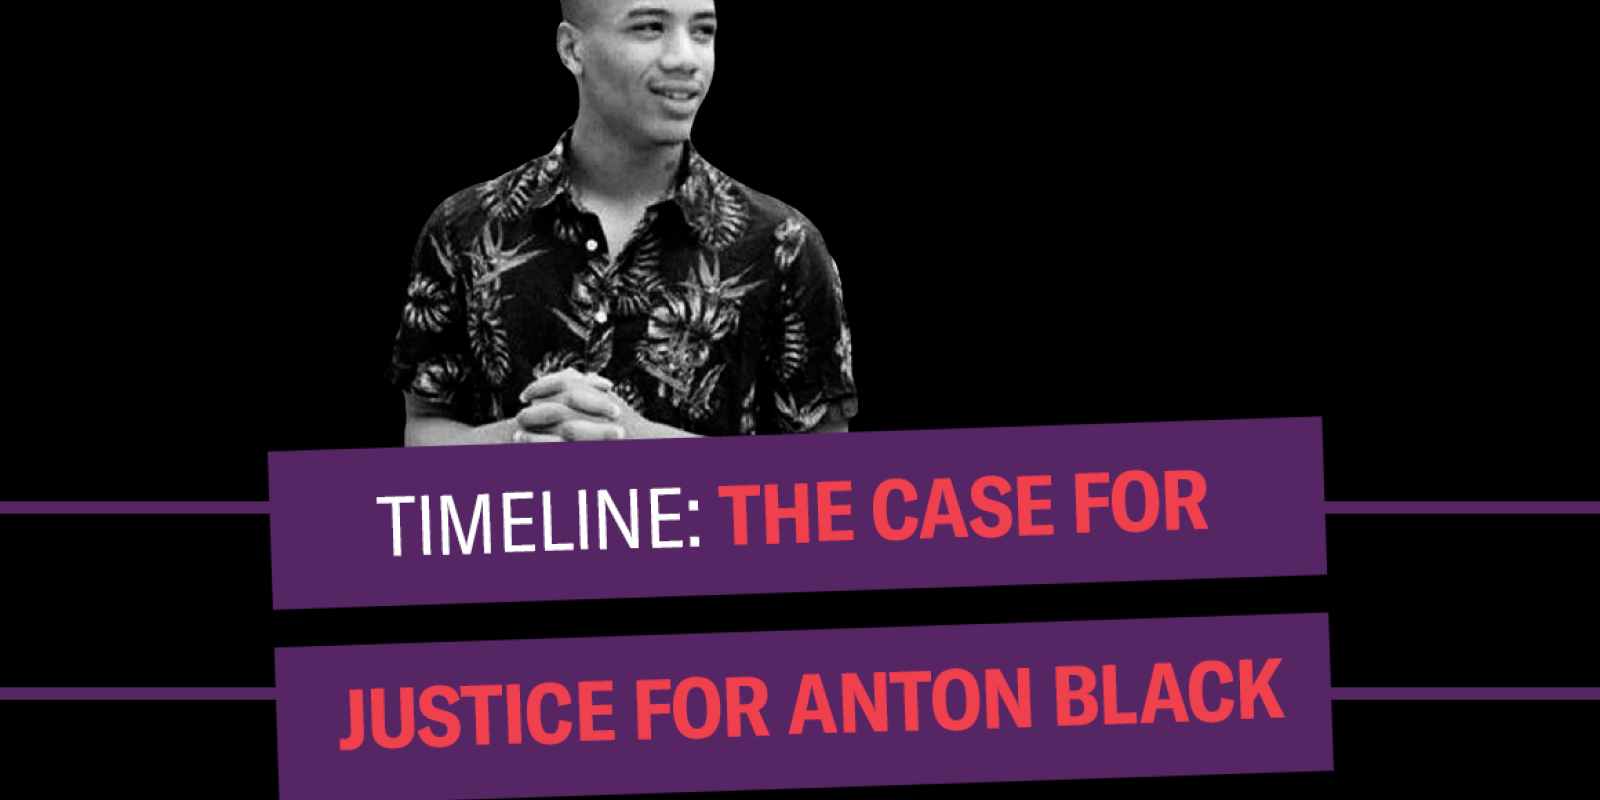 Timeline: The Case for Justice for Anton Black. Black and white photo of Anton Black smiling and looking to the right. Background is black.